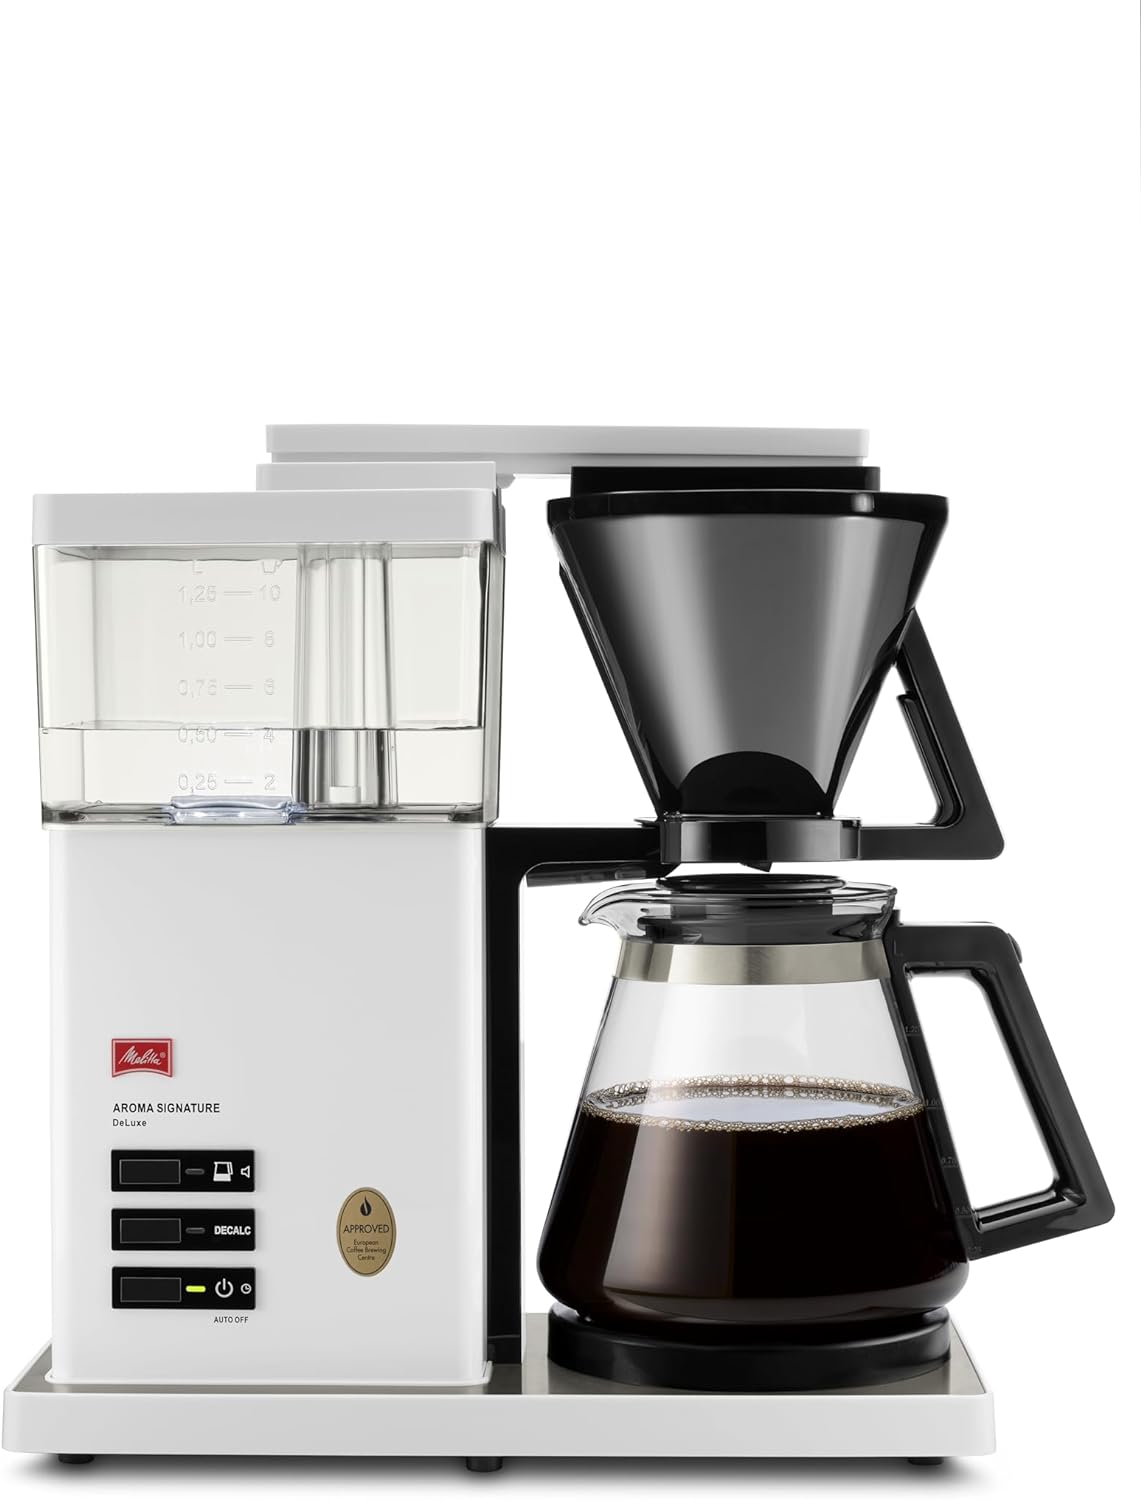 Melitta Aromasignature Deluxe Filter Coffee Machine With Glass Jug, 10 Cups, White